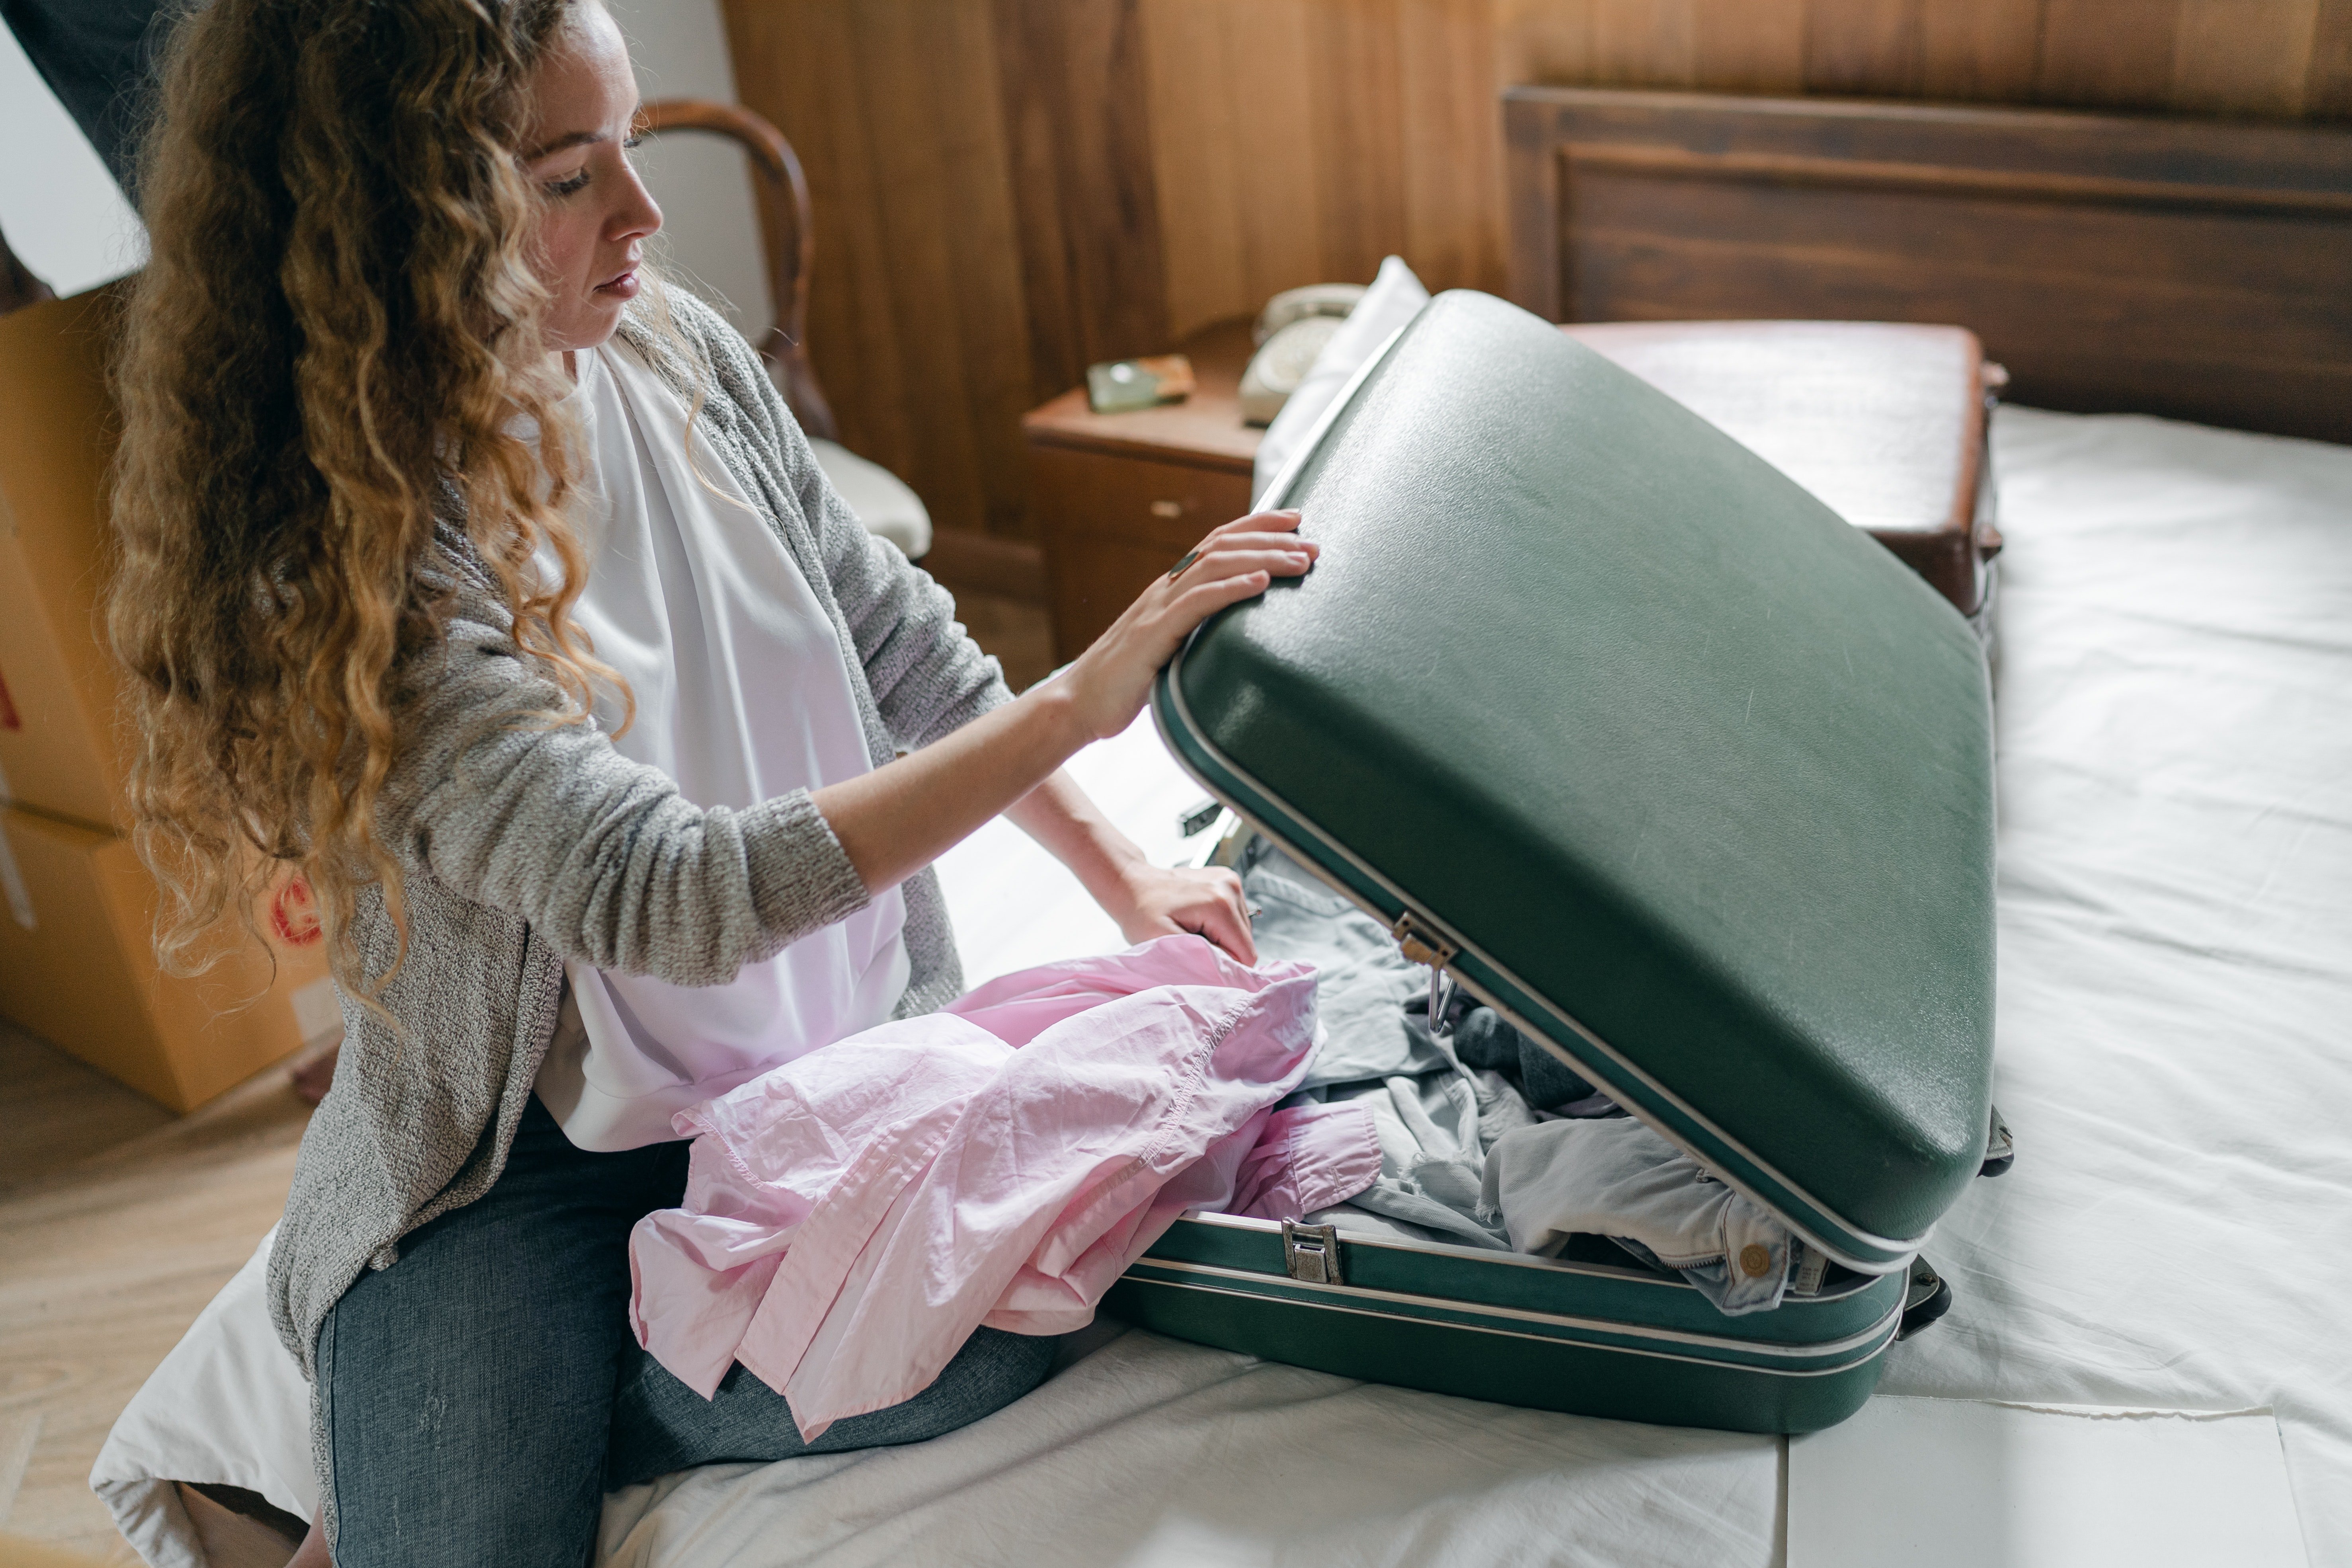 April packed her stuff and left | Photo: Pexels